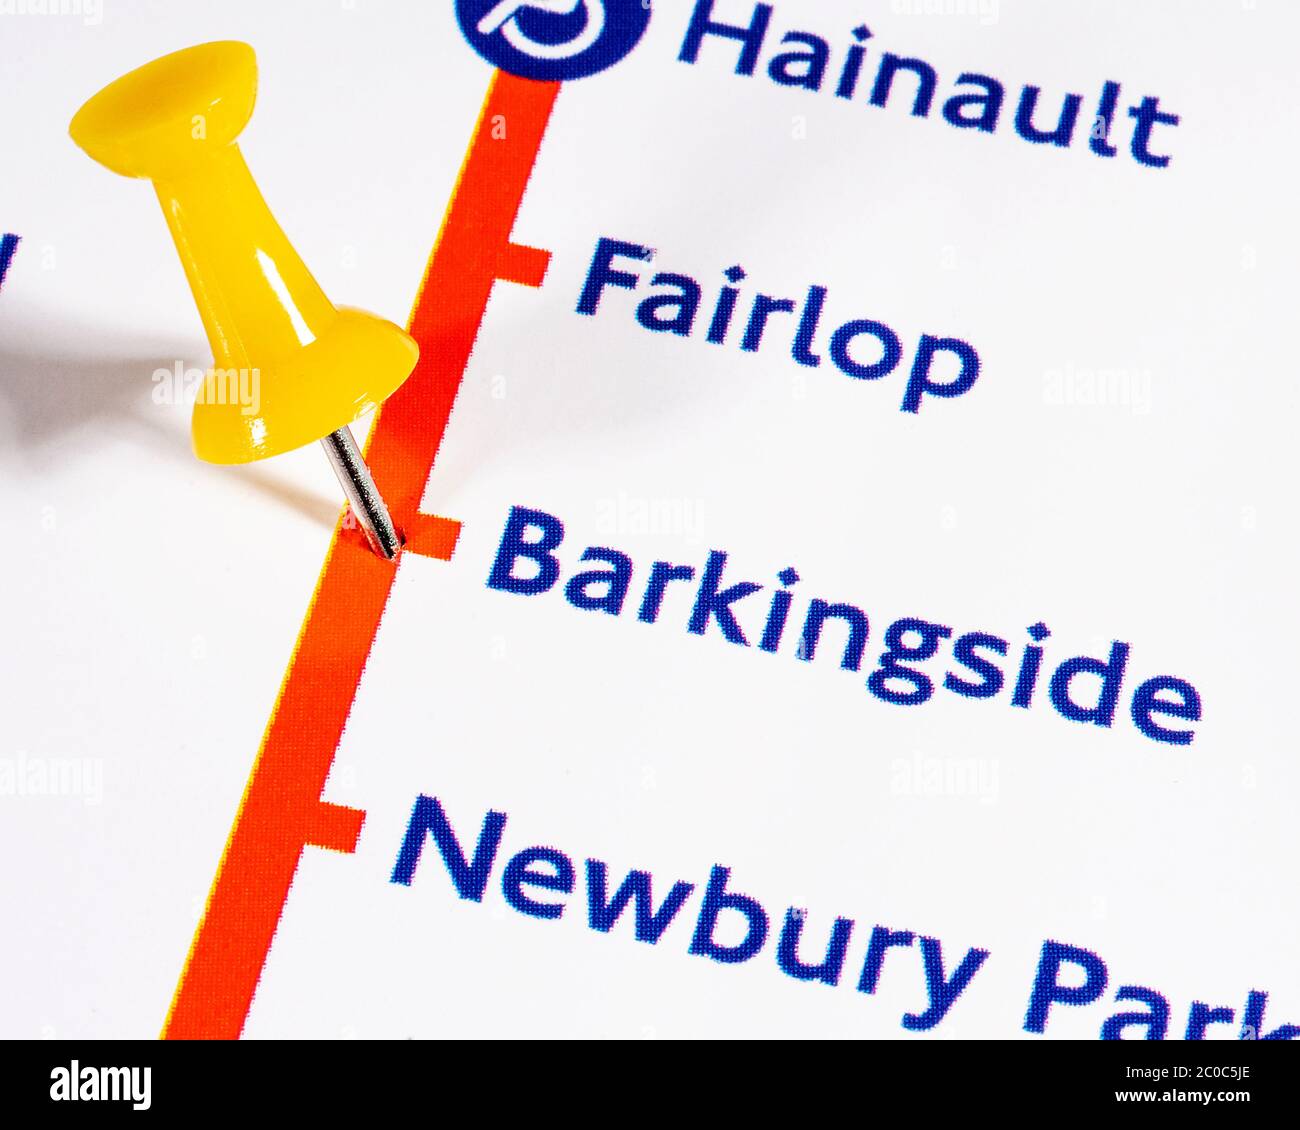 London, UK - June 10th 2020: A map pin marking the location of Barkingside Station on a London Underground tube Map Stock Photo